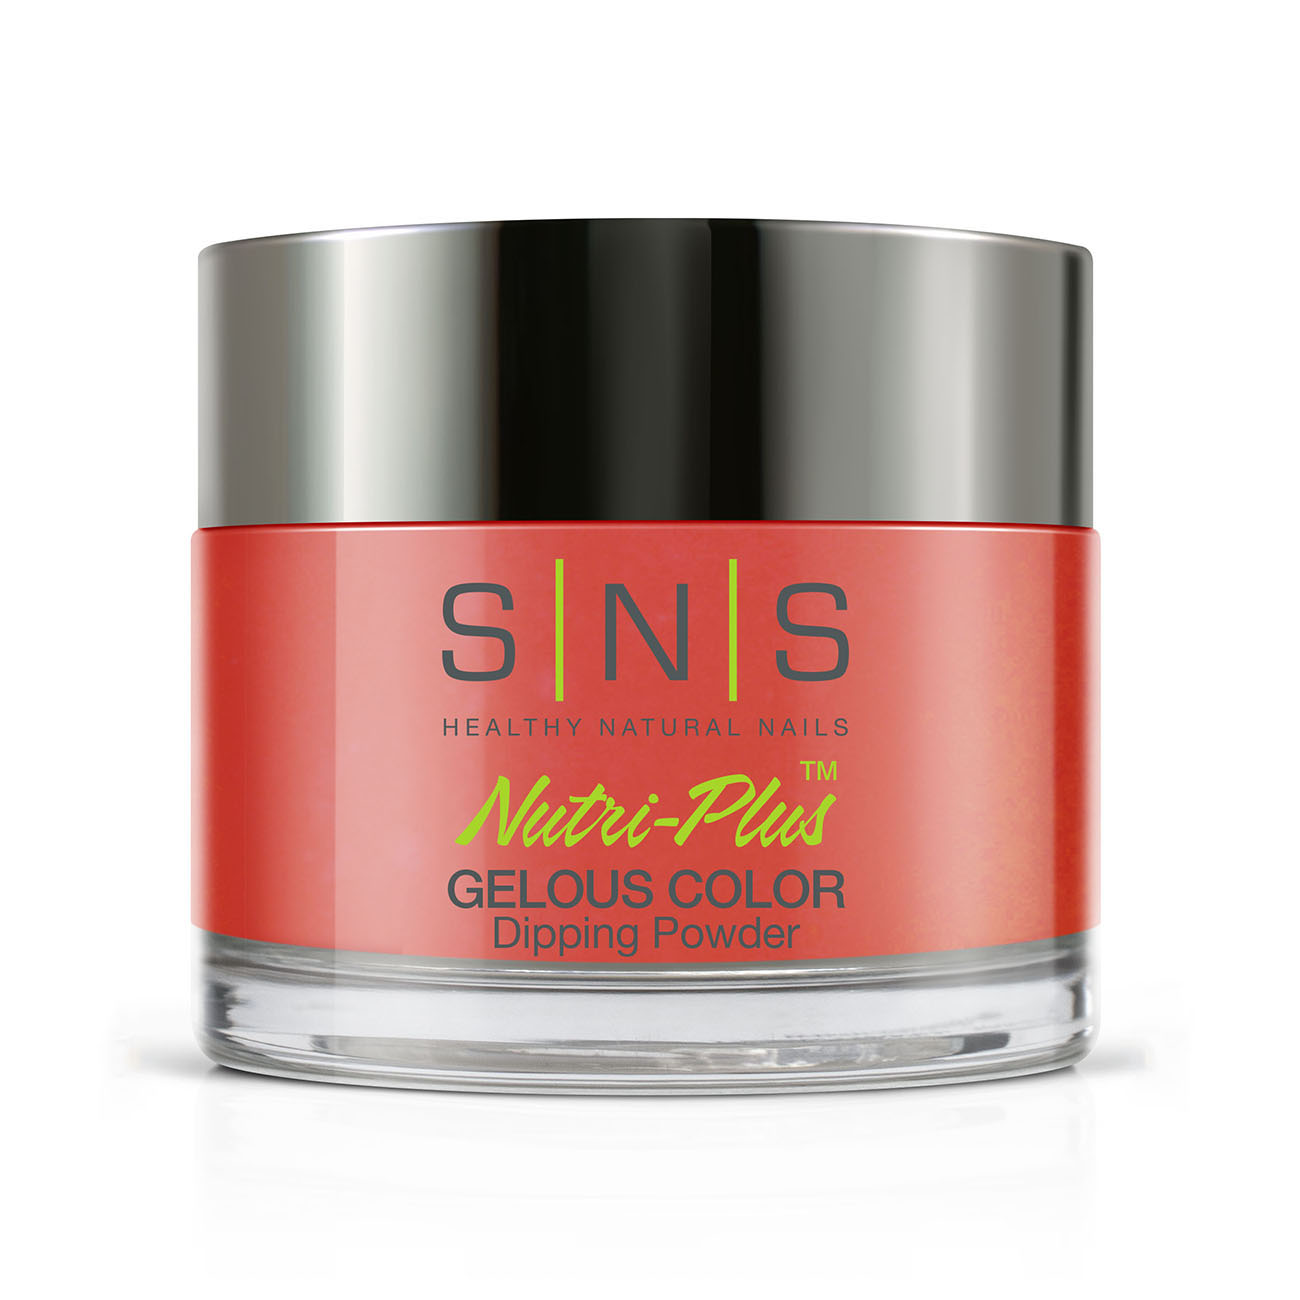 SNS Nails SP17 Pudding 28g (1oz) | Gelous Dipping Powder